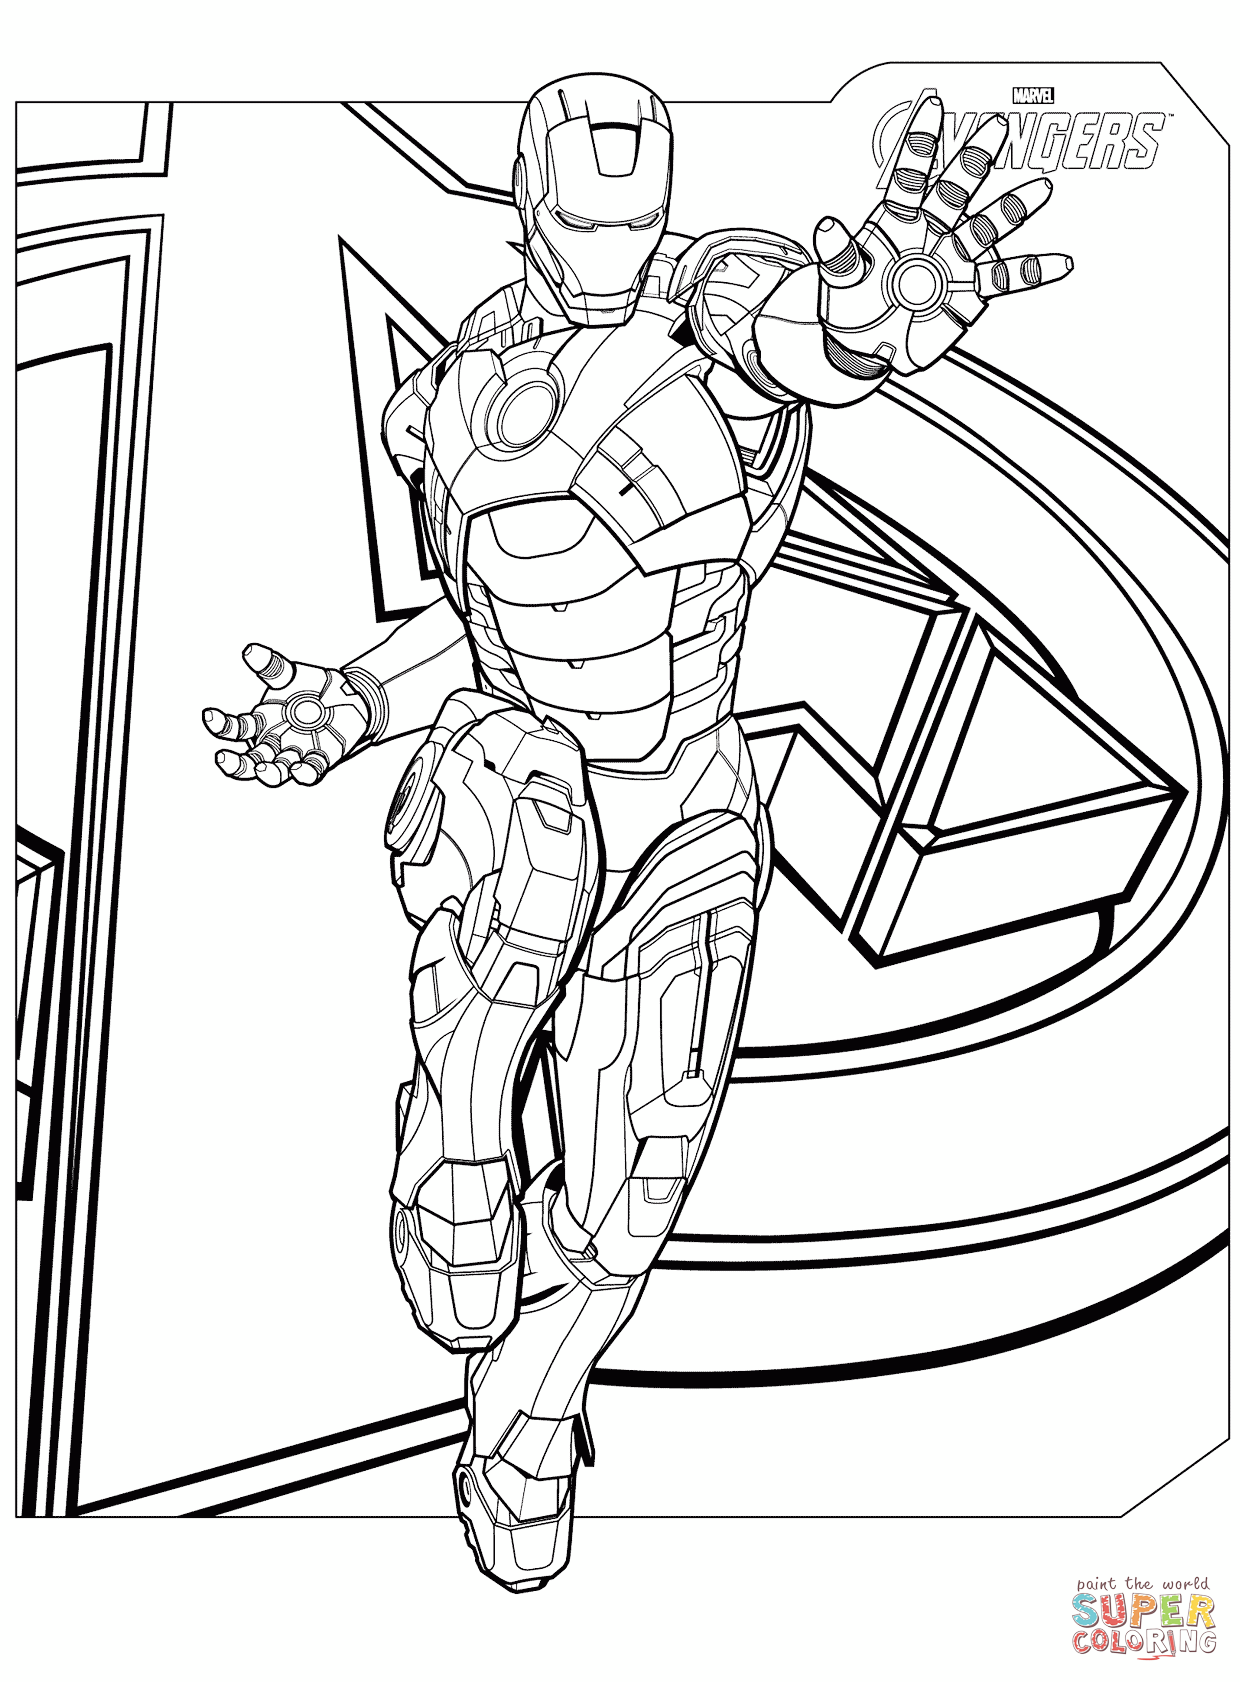 Avengers The Hulk coloring page | Free Printable Coloring Pages